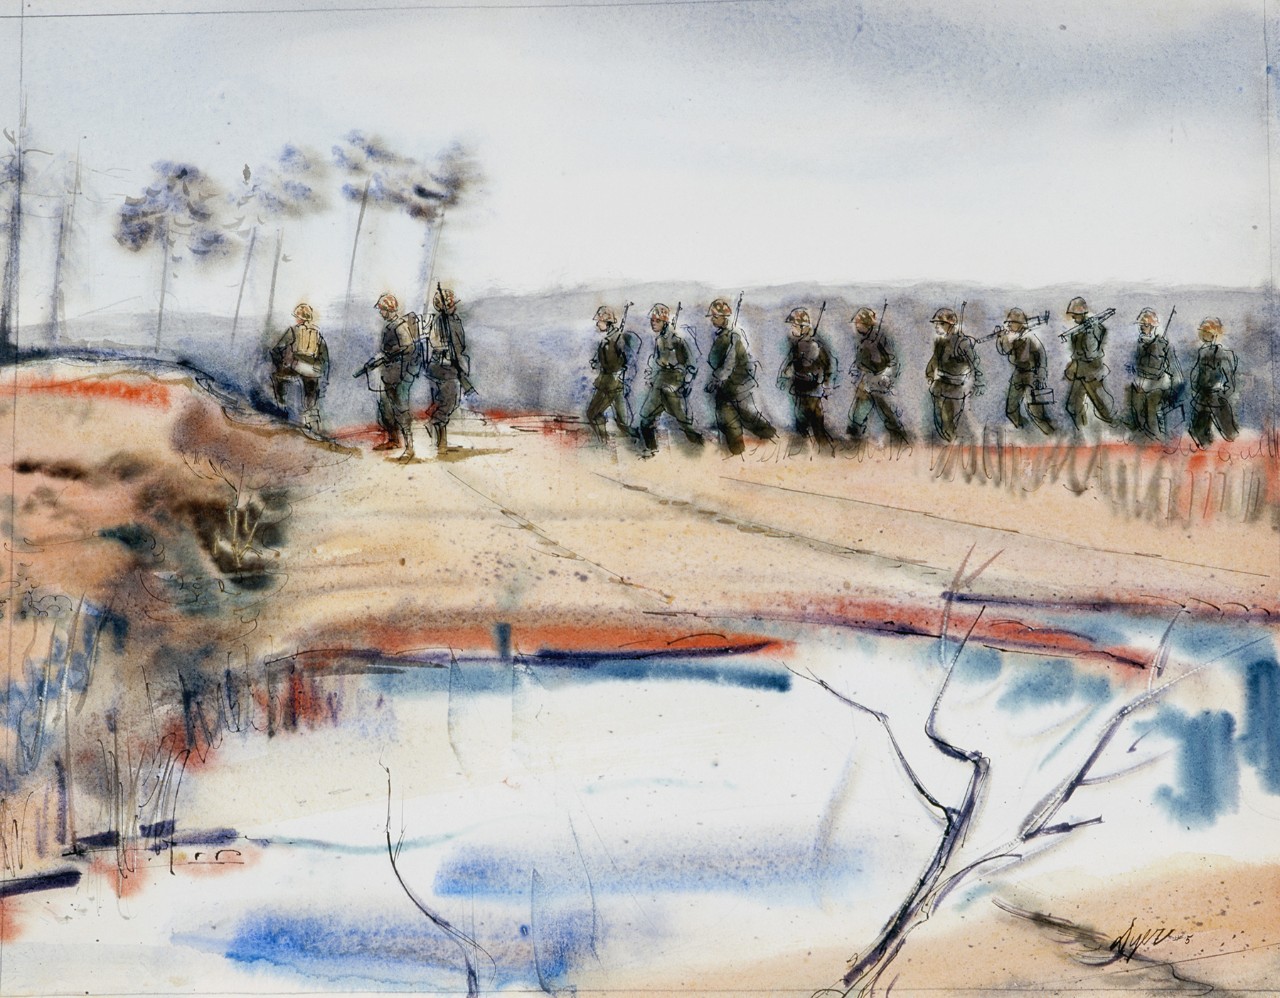 Marines are marching across a field